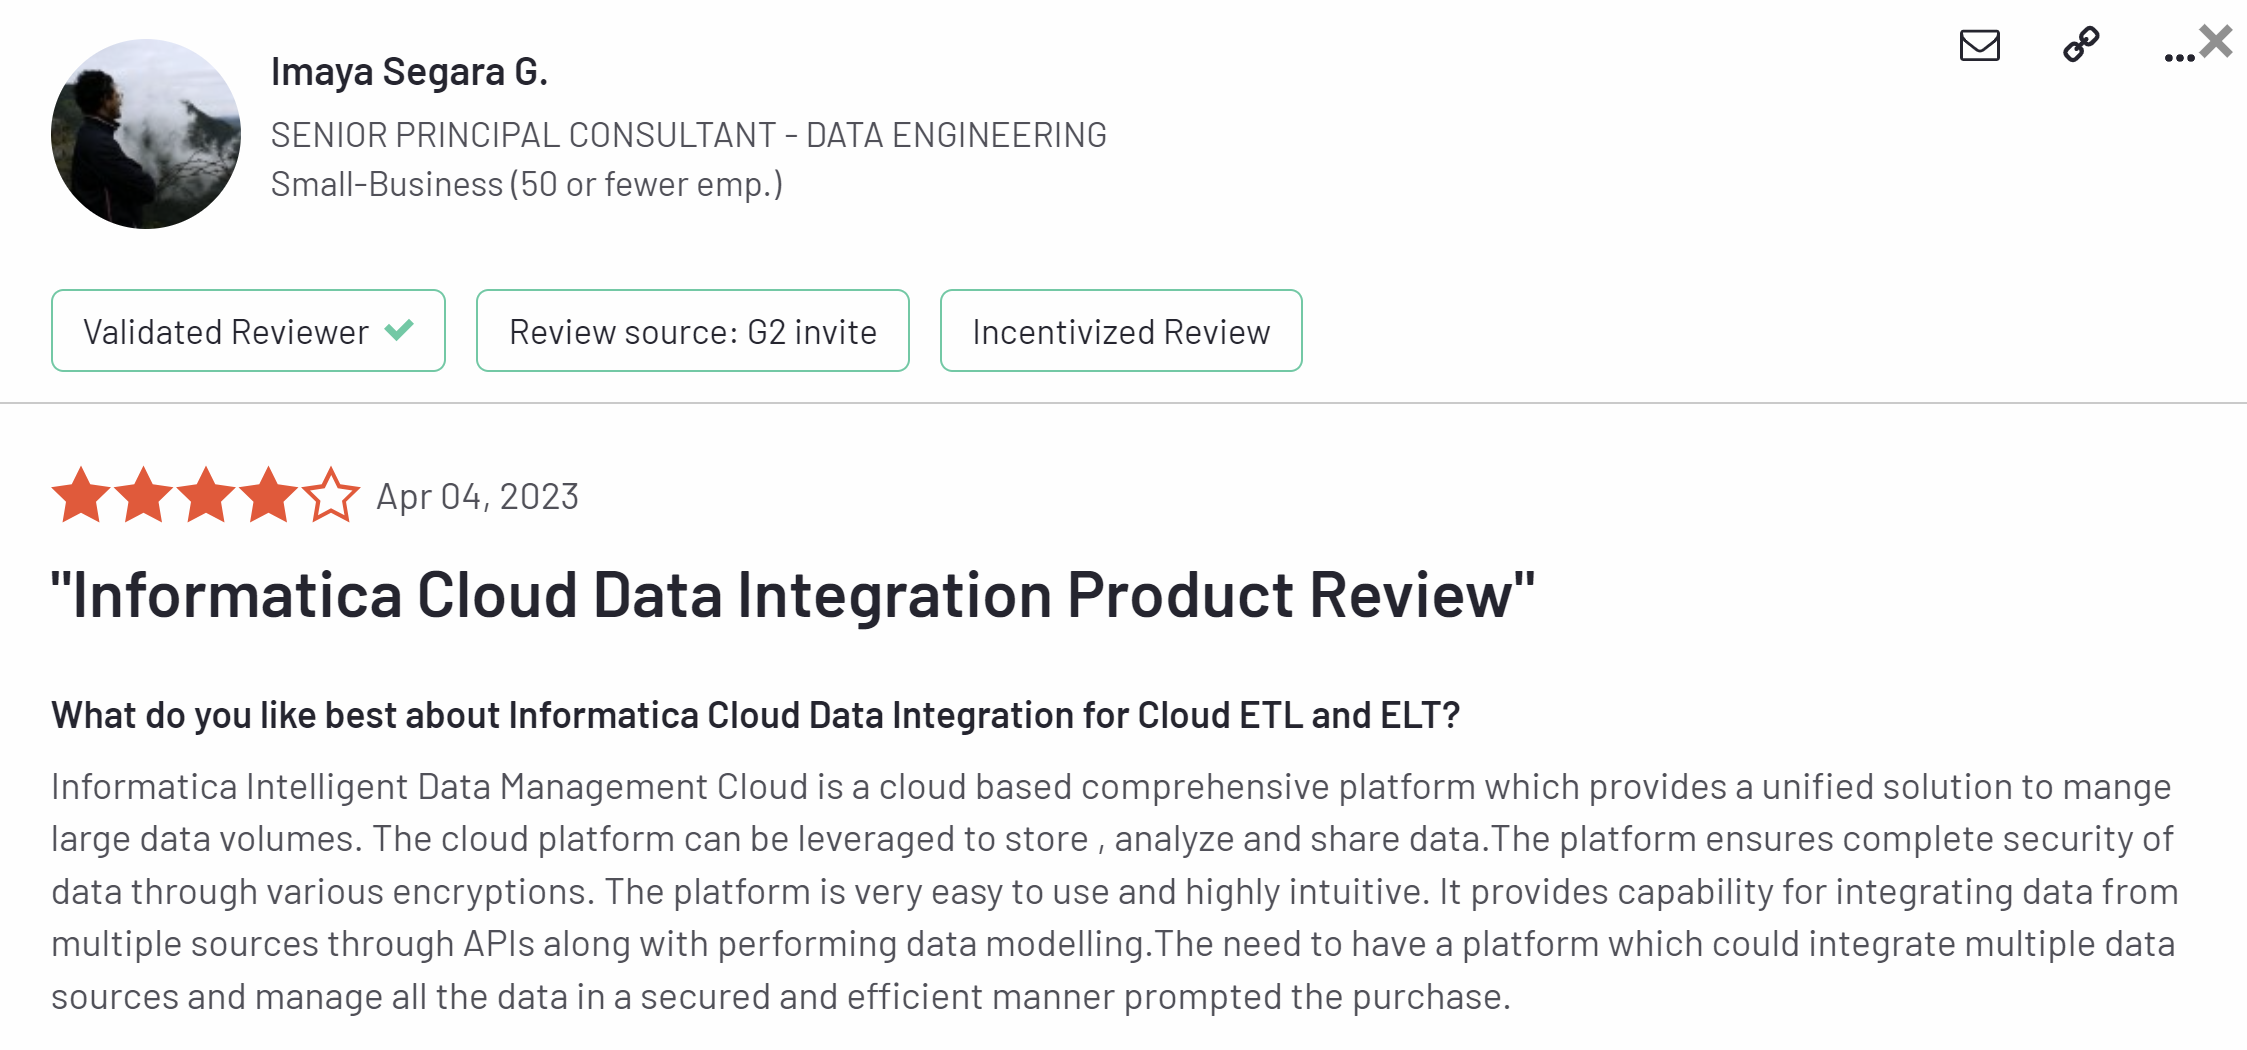 https://www.g2.com/products/informatica-cloud-data-integration-for-cloud-etl-and-elt/reviews/informatica-cloud-data-integration-for-cloud-etl-and-elt-review-7908976